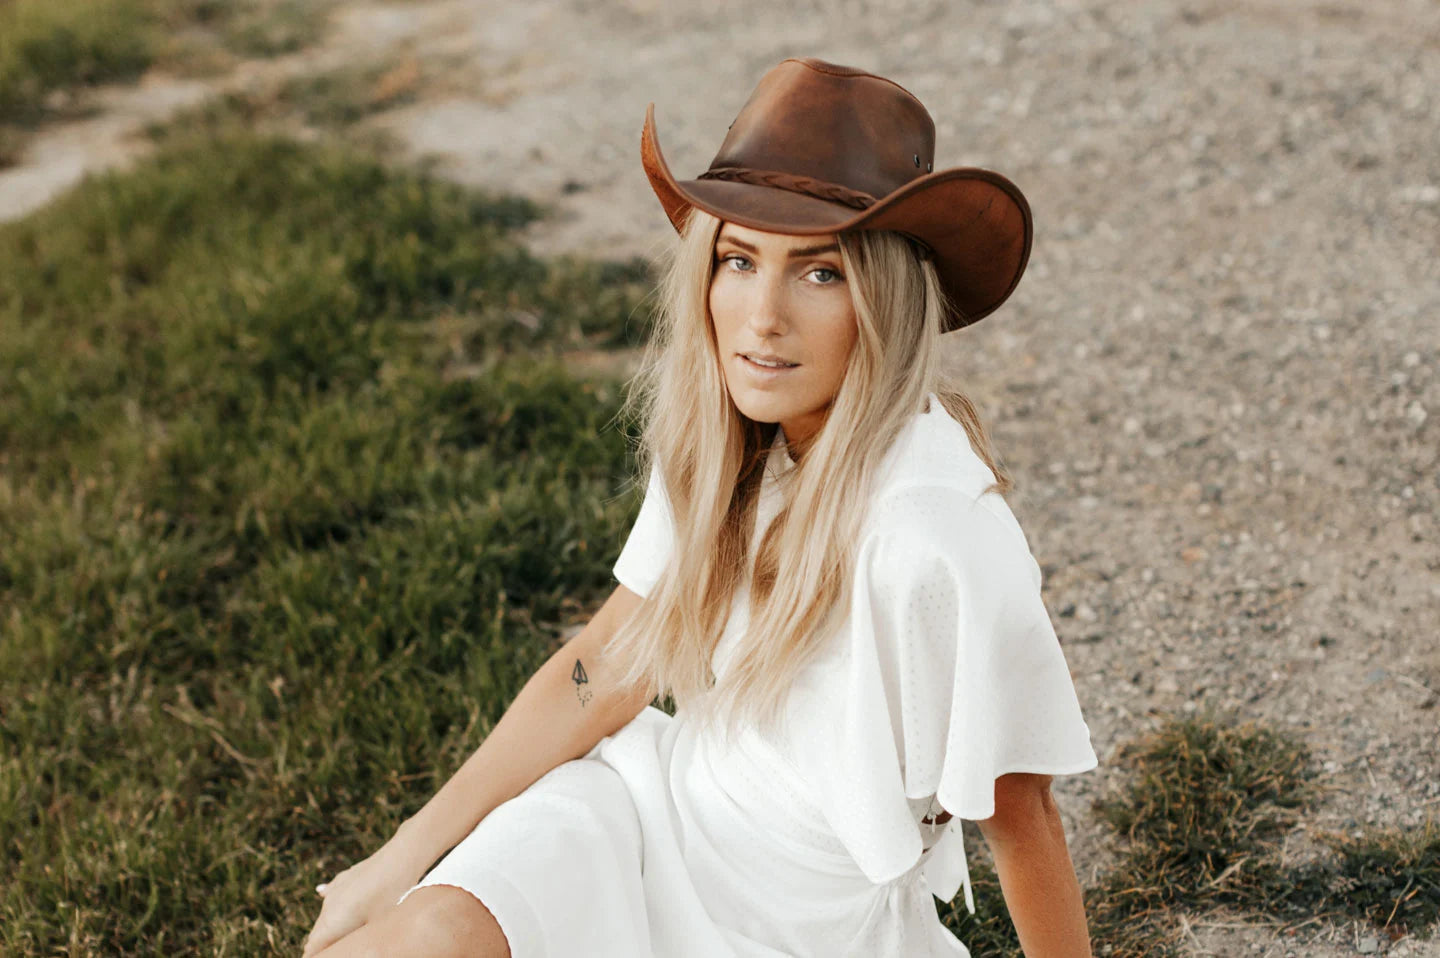 A woman in a white dress sitting on the ground wearing a brown leather hat